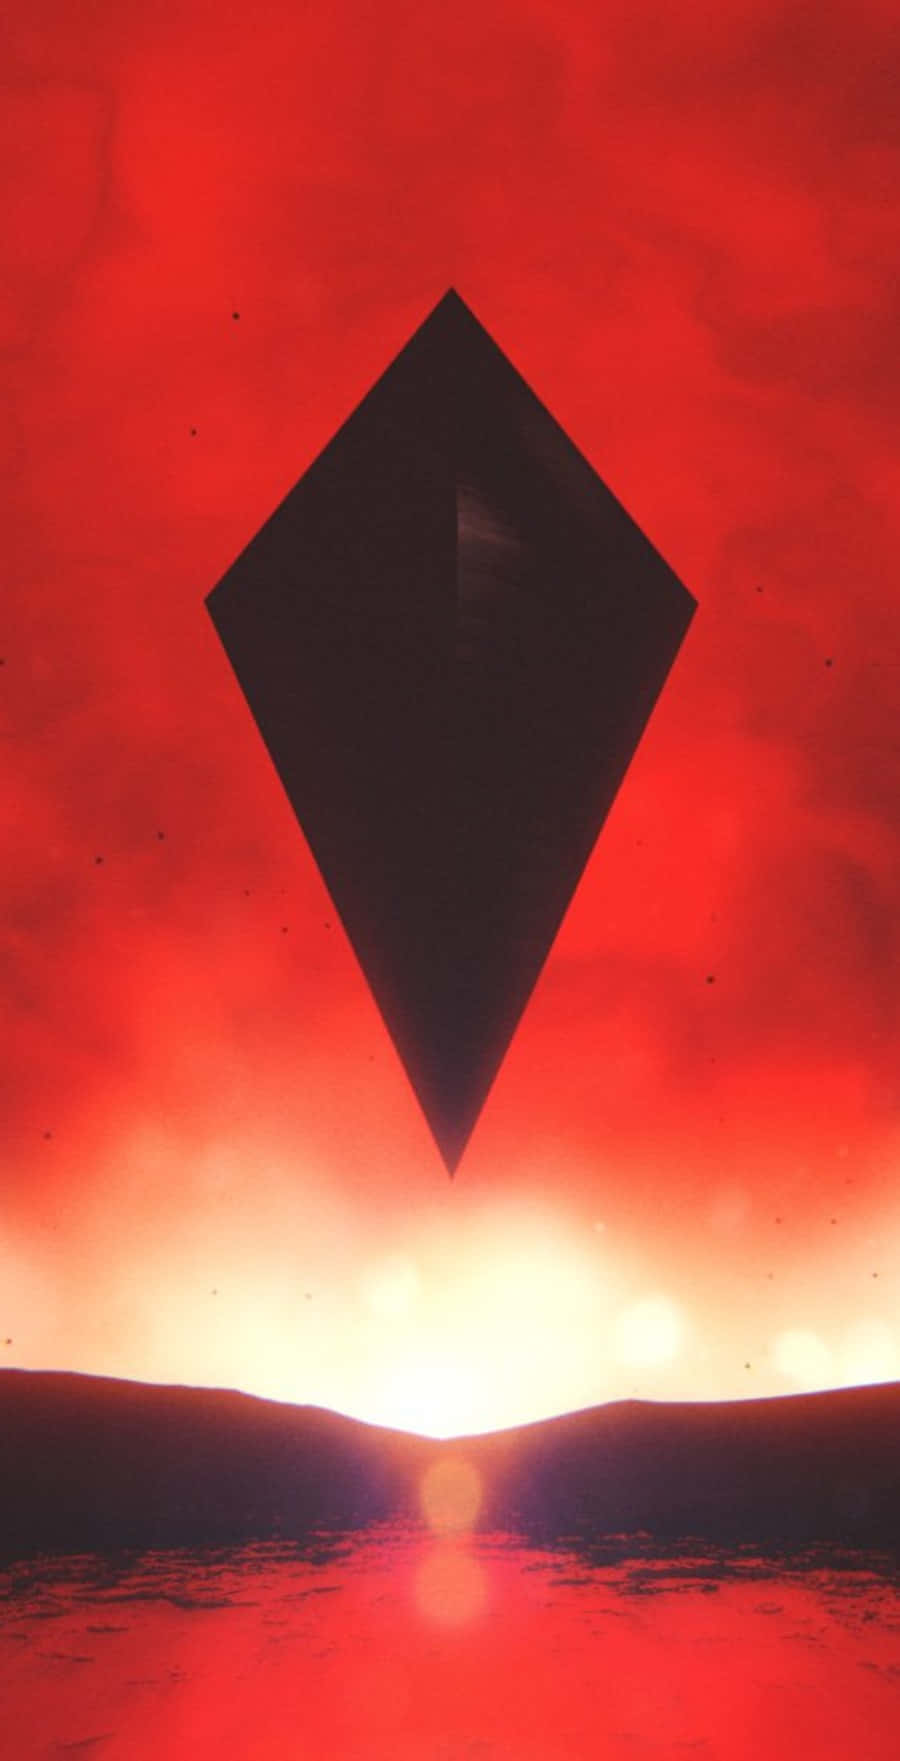 A Black Diamond In The Sky With A Red Sunset Wallpaper